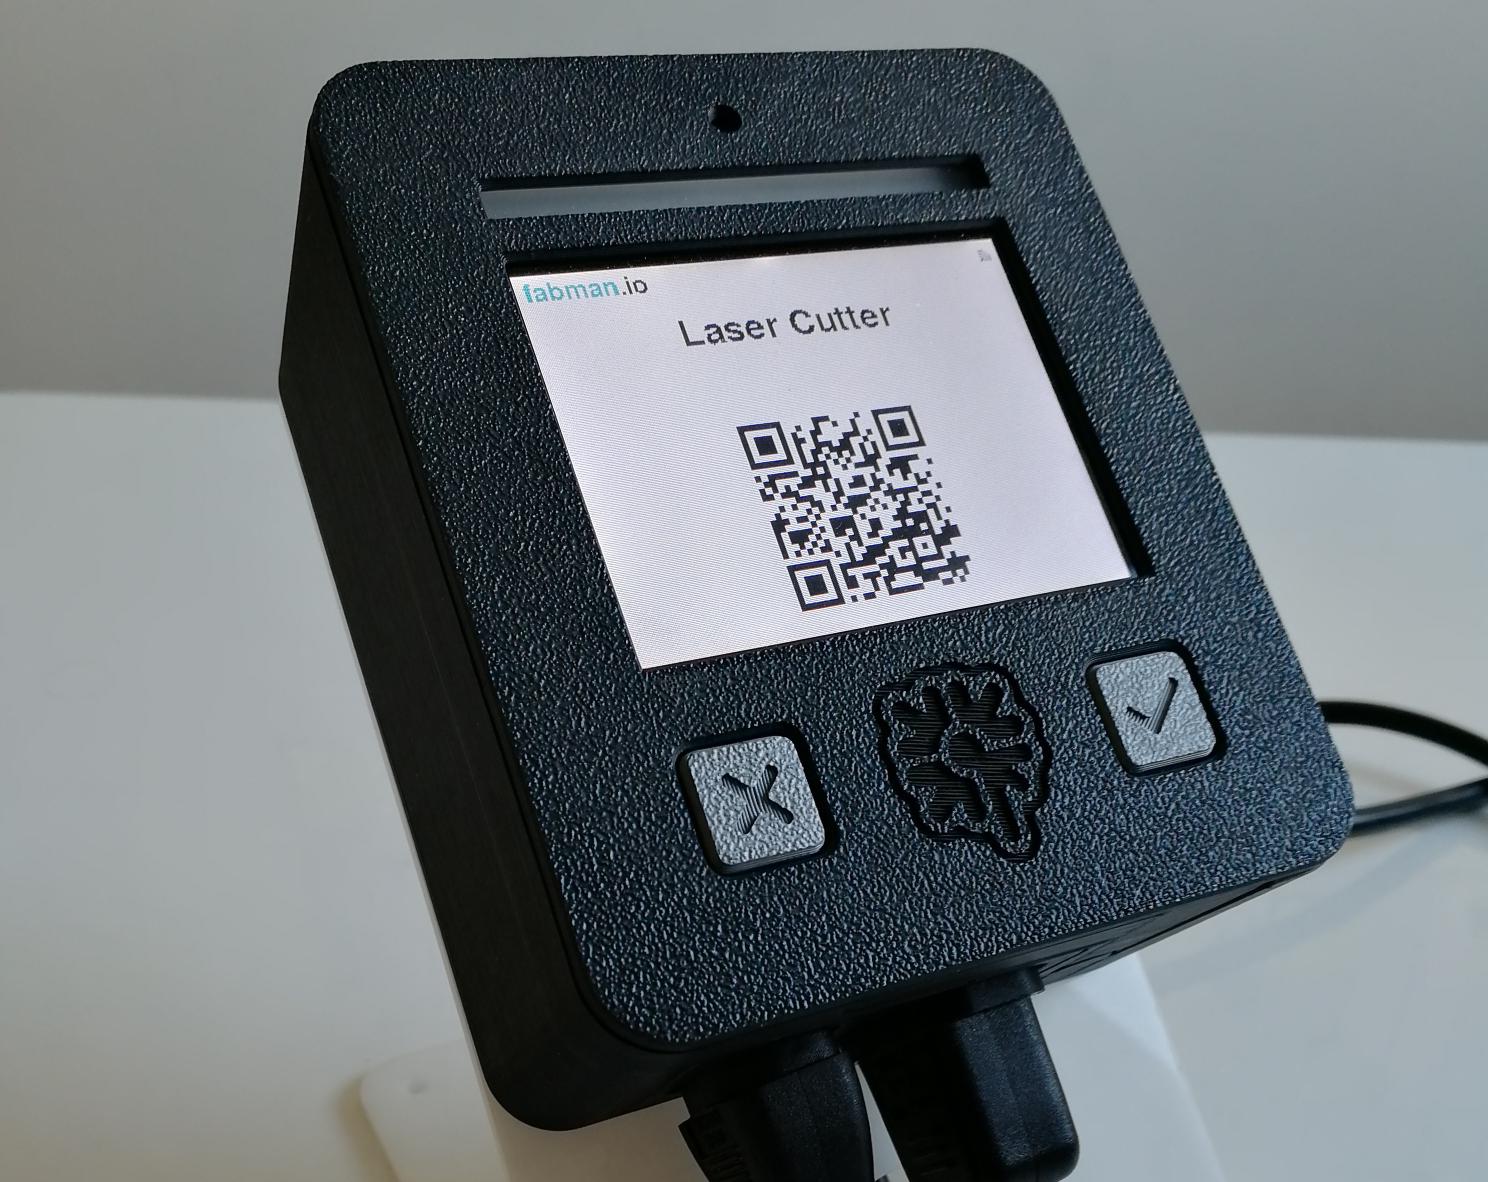 Bridge with a QR code for switching it on with your phone